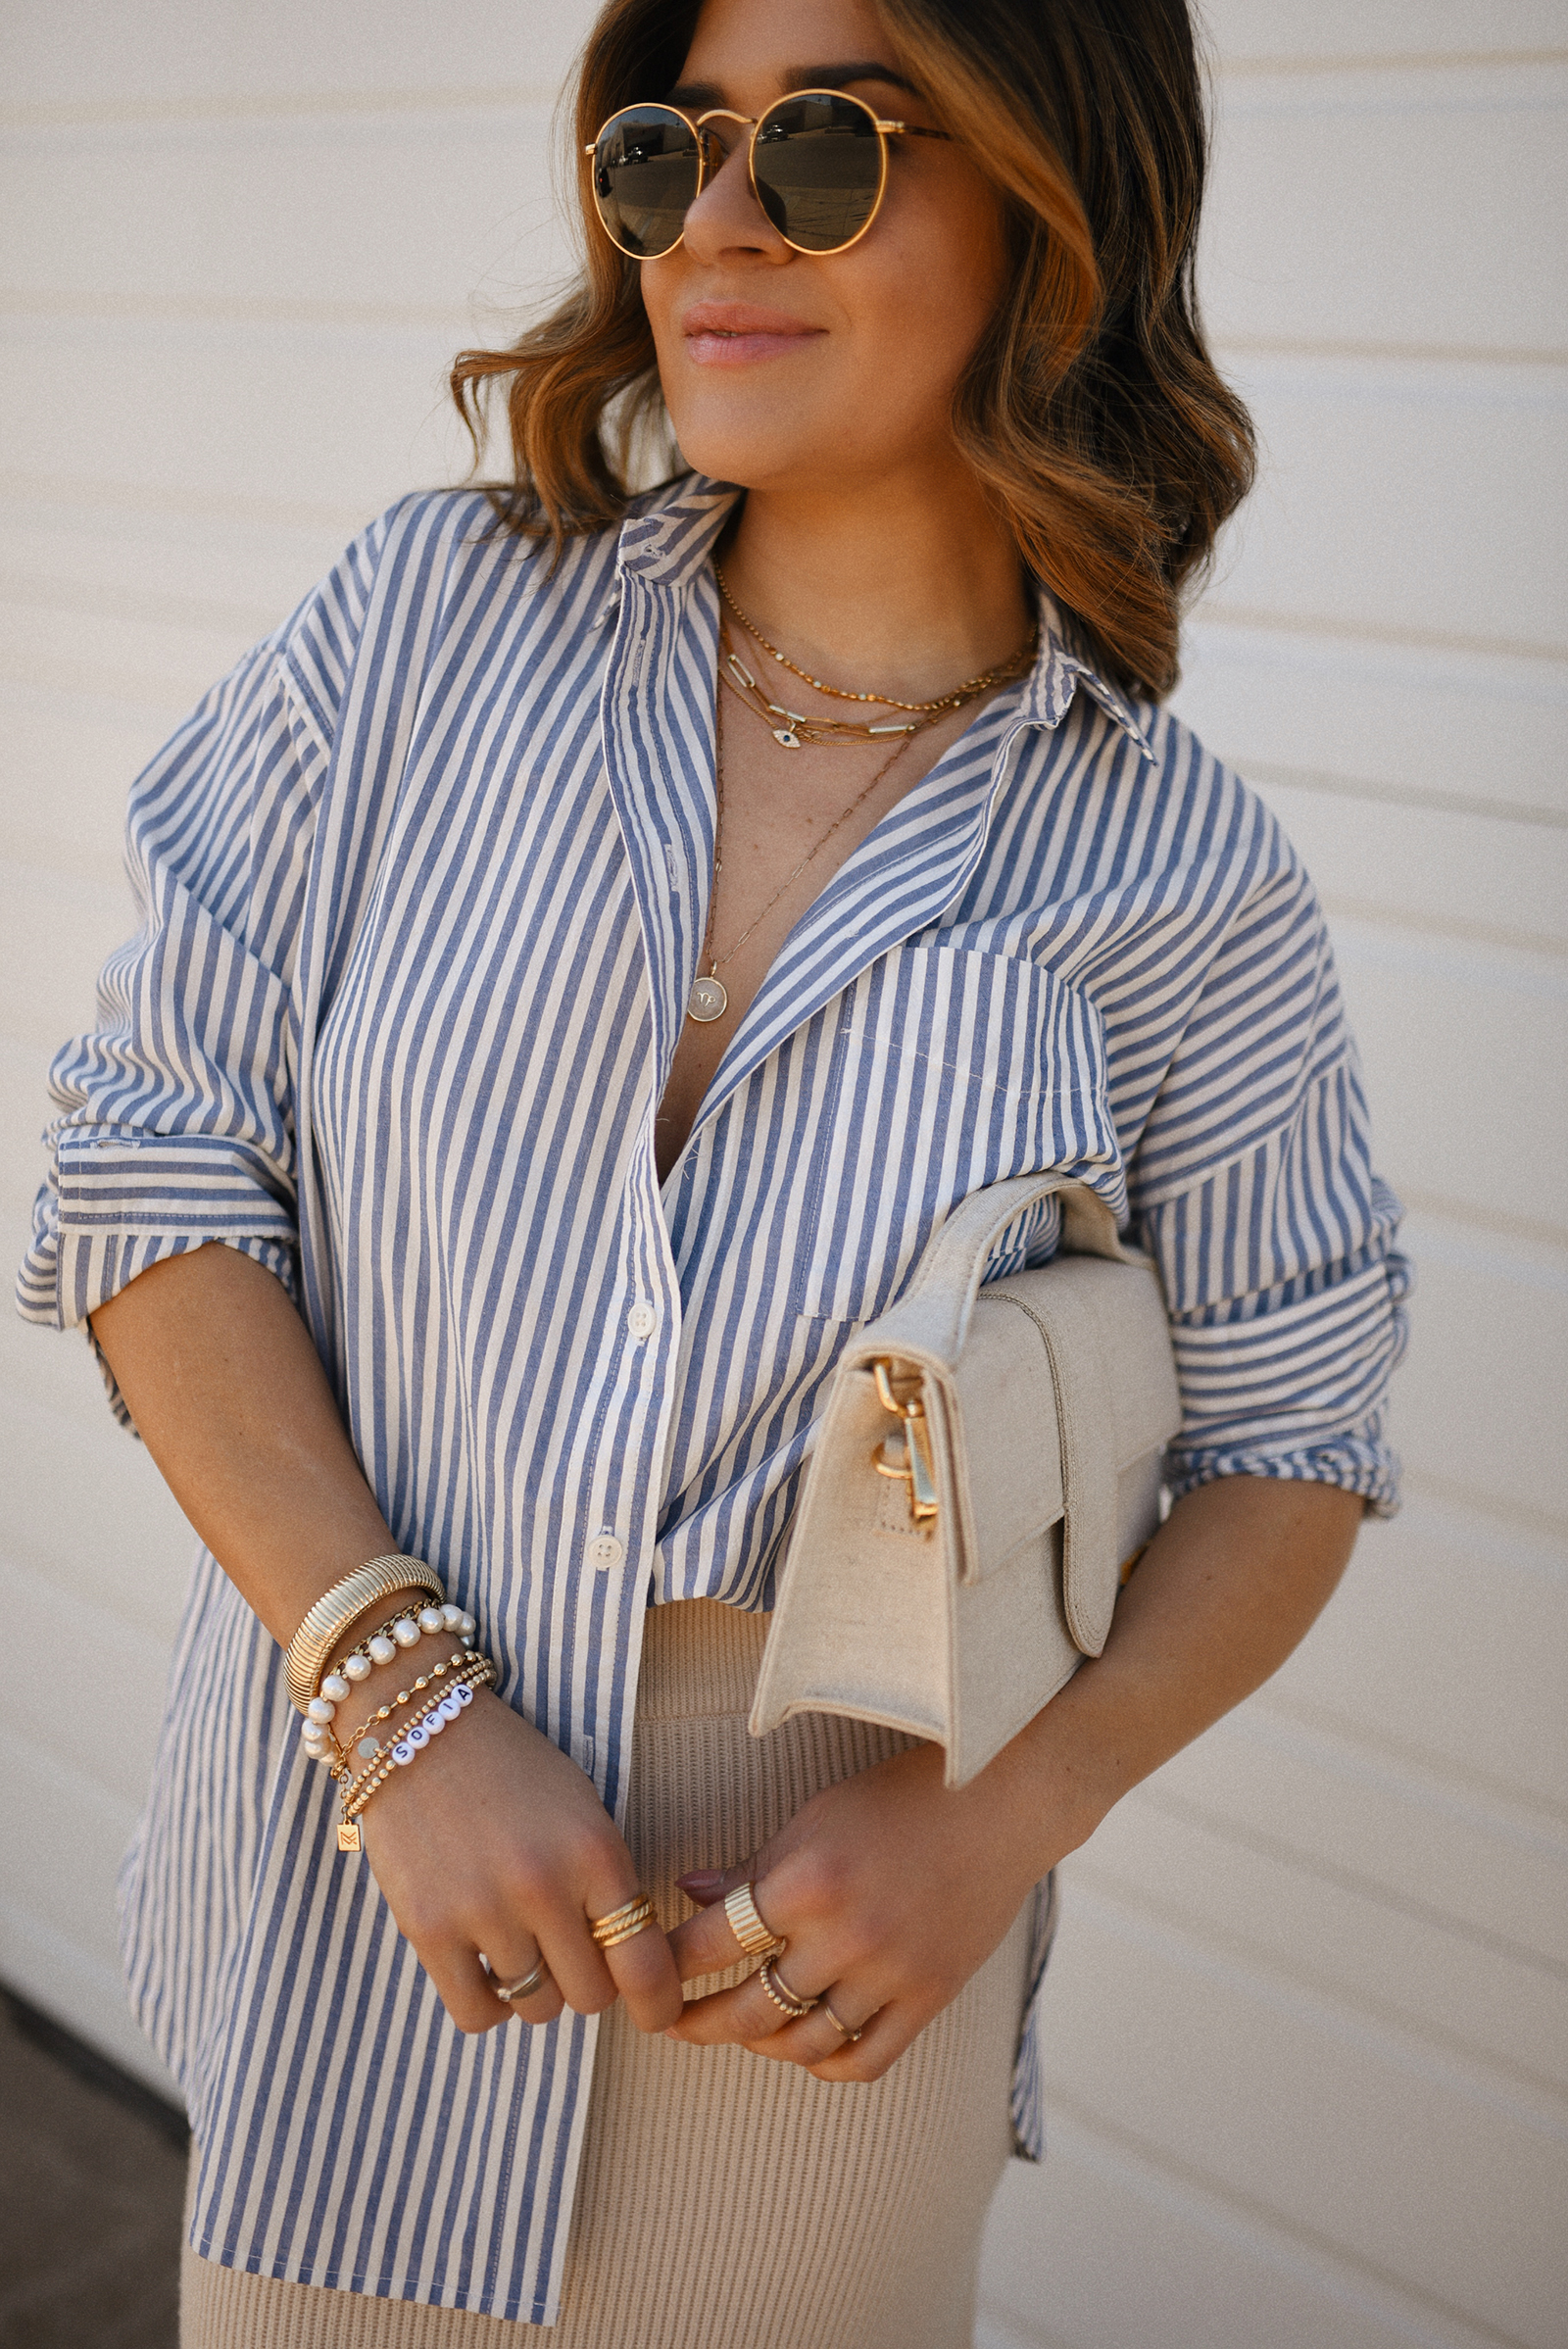 Carolina Hellal of Chic Talk wearing a Madewell striped oversize shirt, a Sezane beige skirt, black sandals and Le grand Bambino bag from Jacquemus